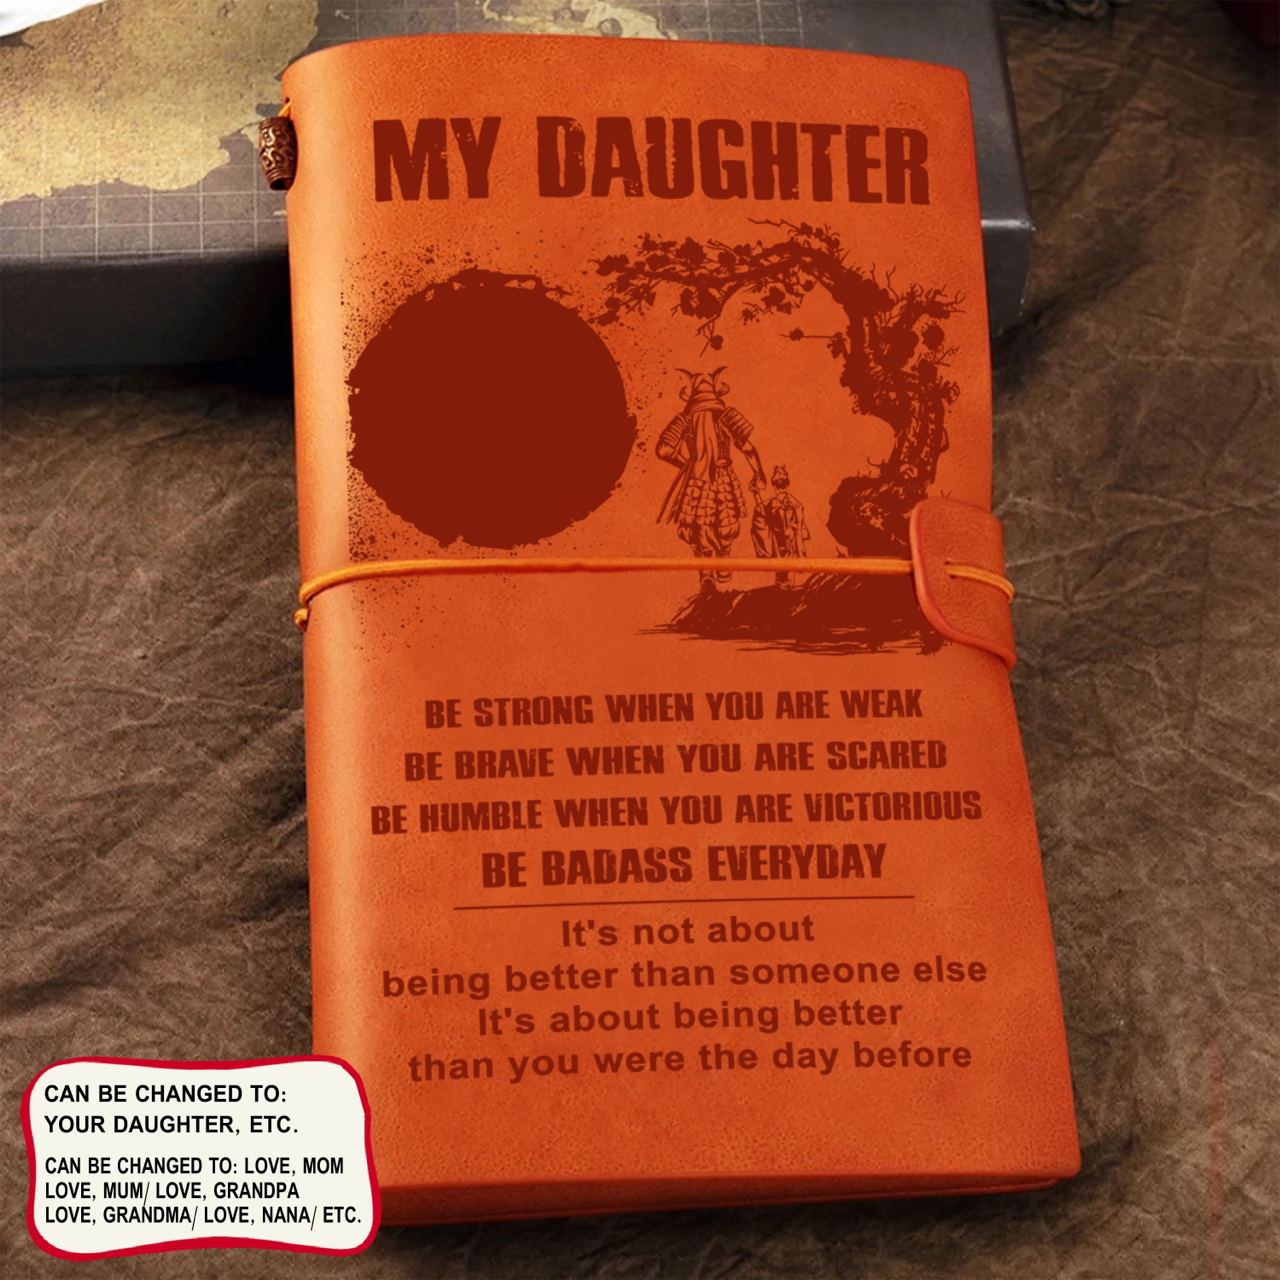 Samurai leather journal notebook gifts from dad mom to daughter, Be strong be brave be humble, It is not about better than someone else, It is about being better than you were the day before